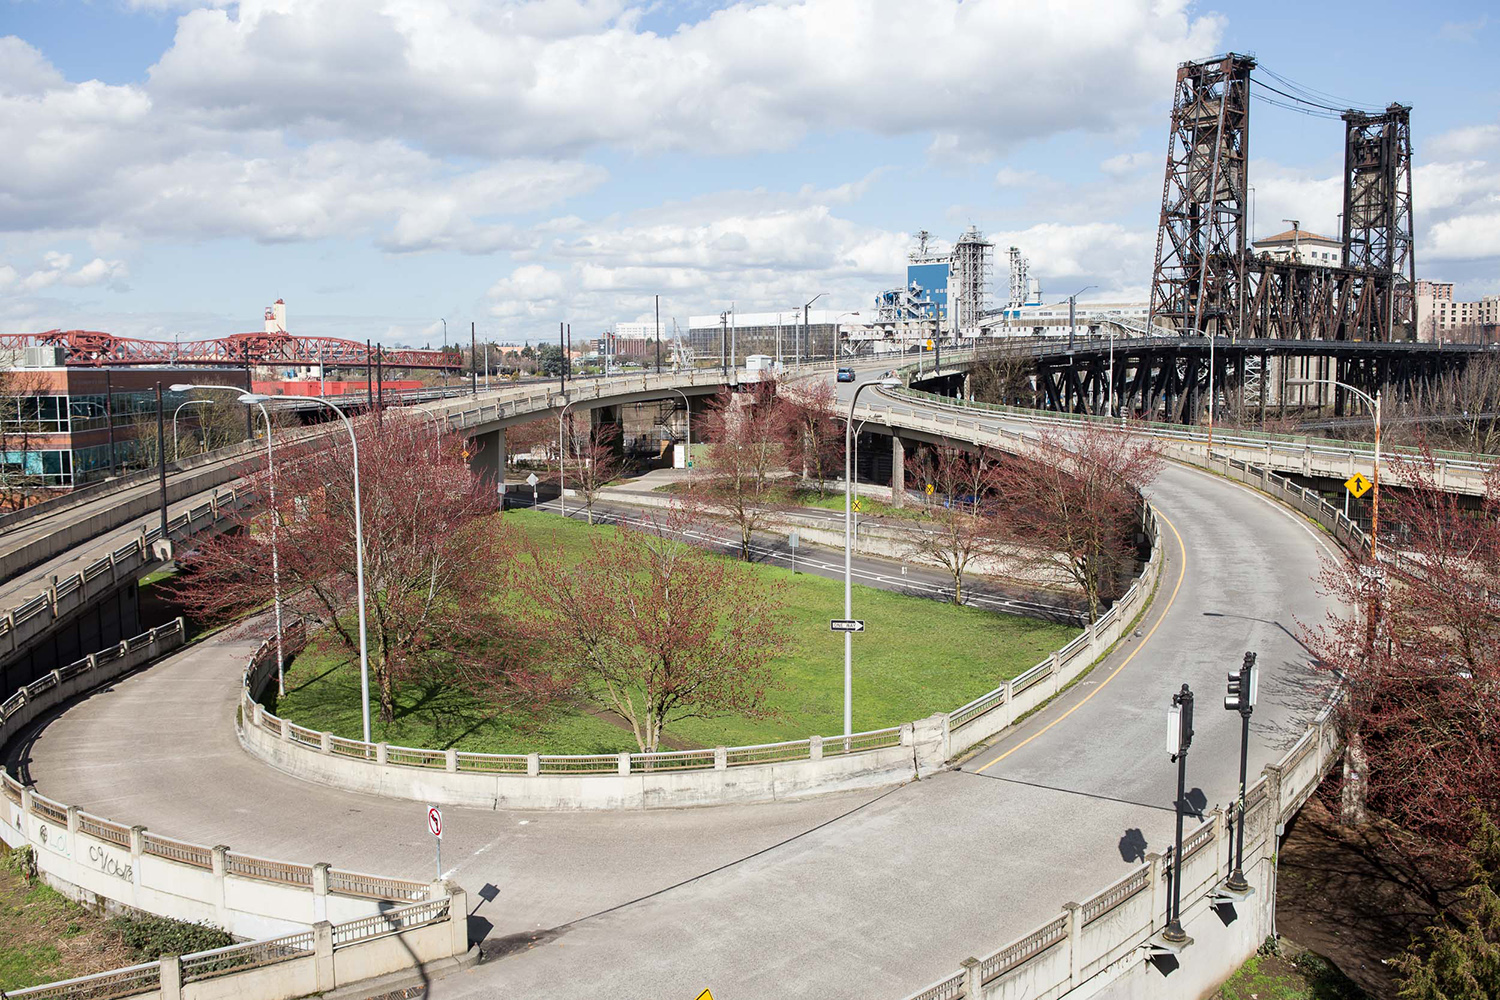  Proposed site location of the ODOT Steel Bridge Skatepark situated on the western side of Naito Parkway. The area is encircled by the Eastbound on-ramp to the Steel Bridge. 